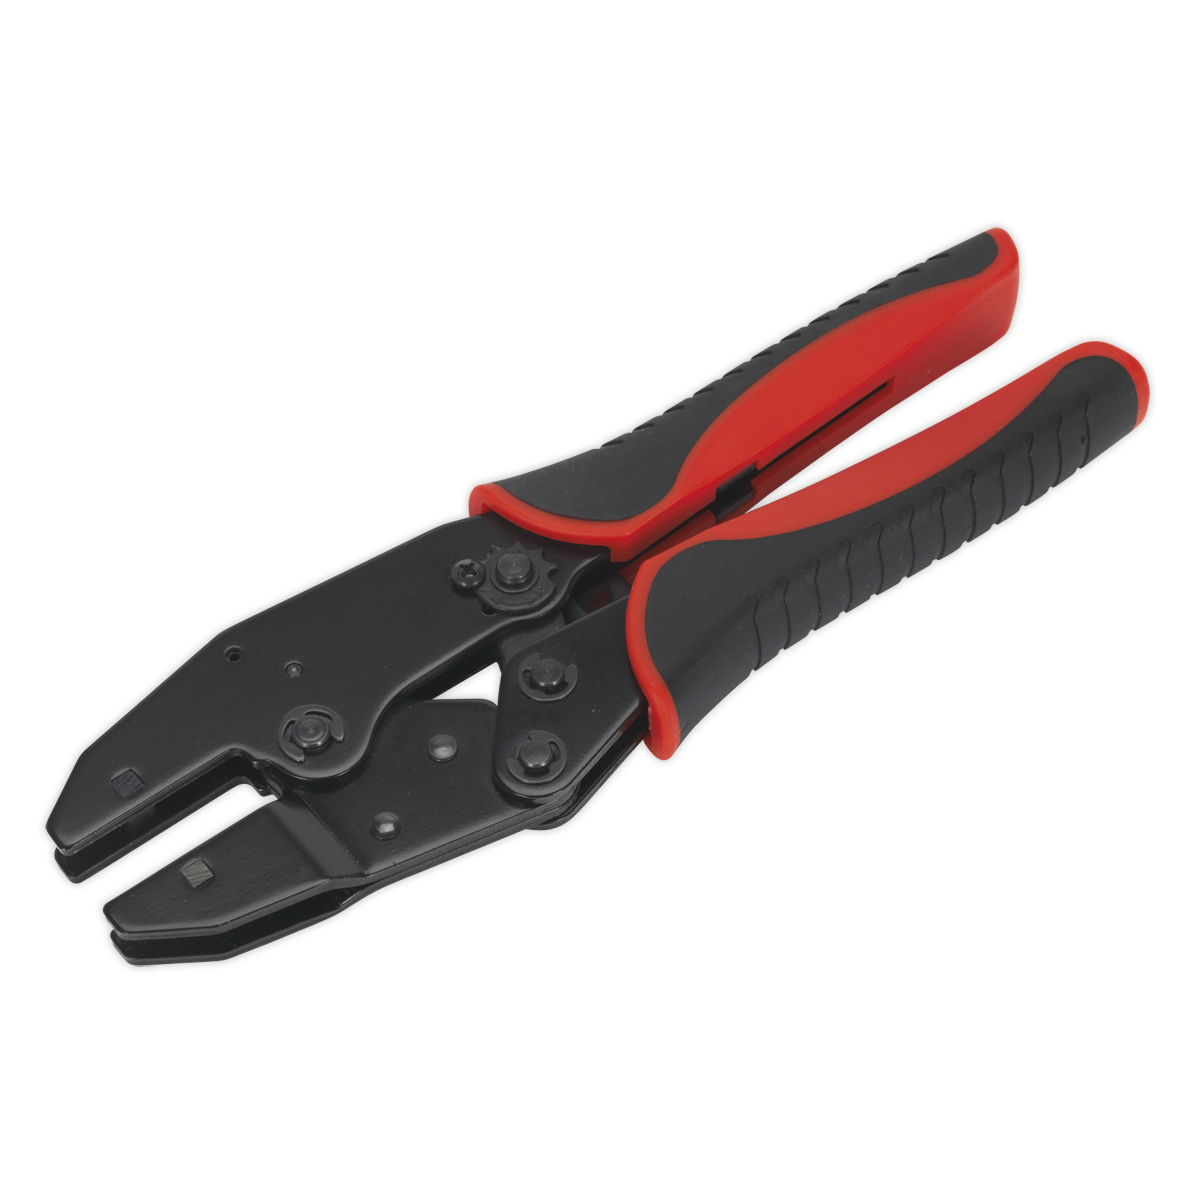 Ratchet Crimping Tool Interchangeable Jaws